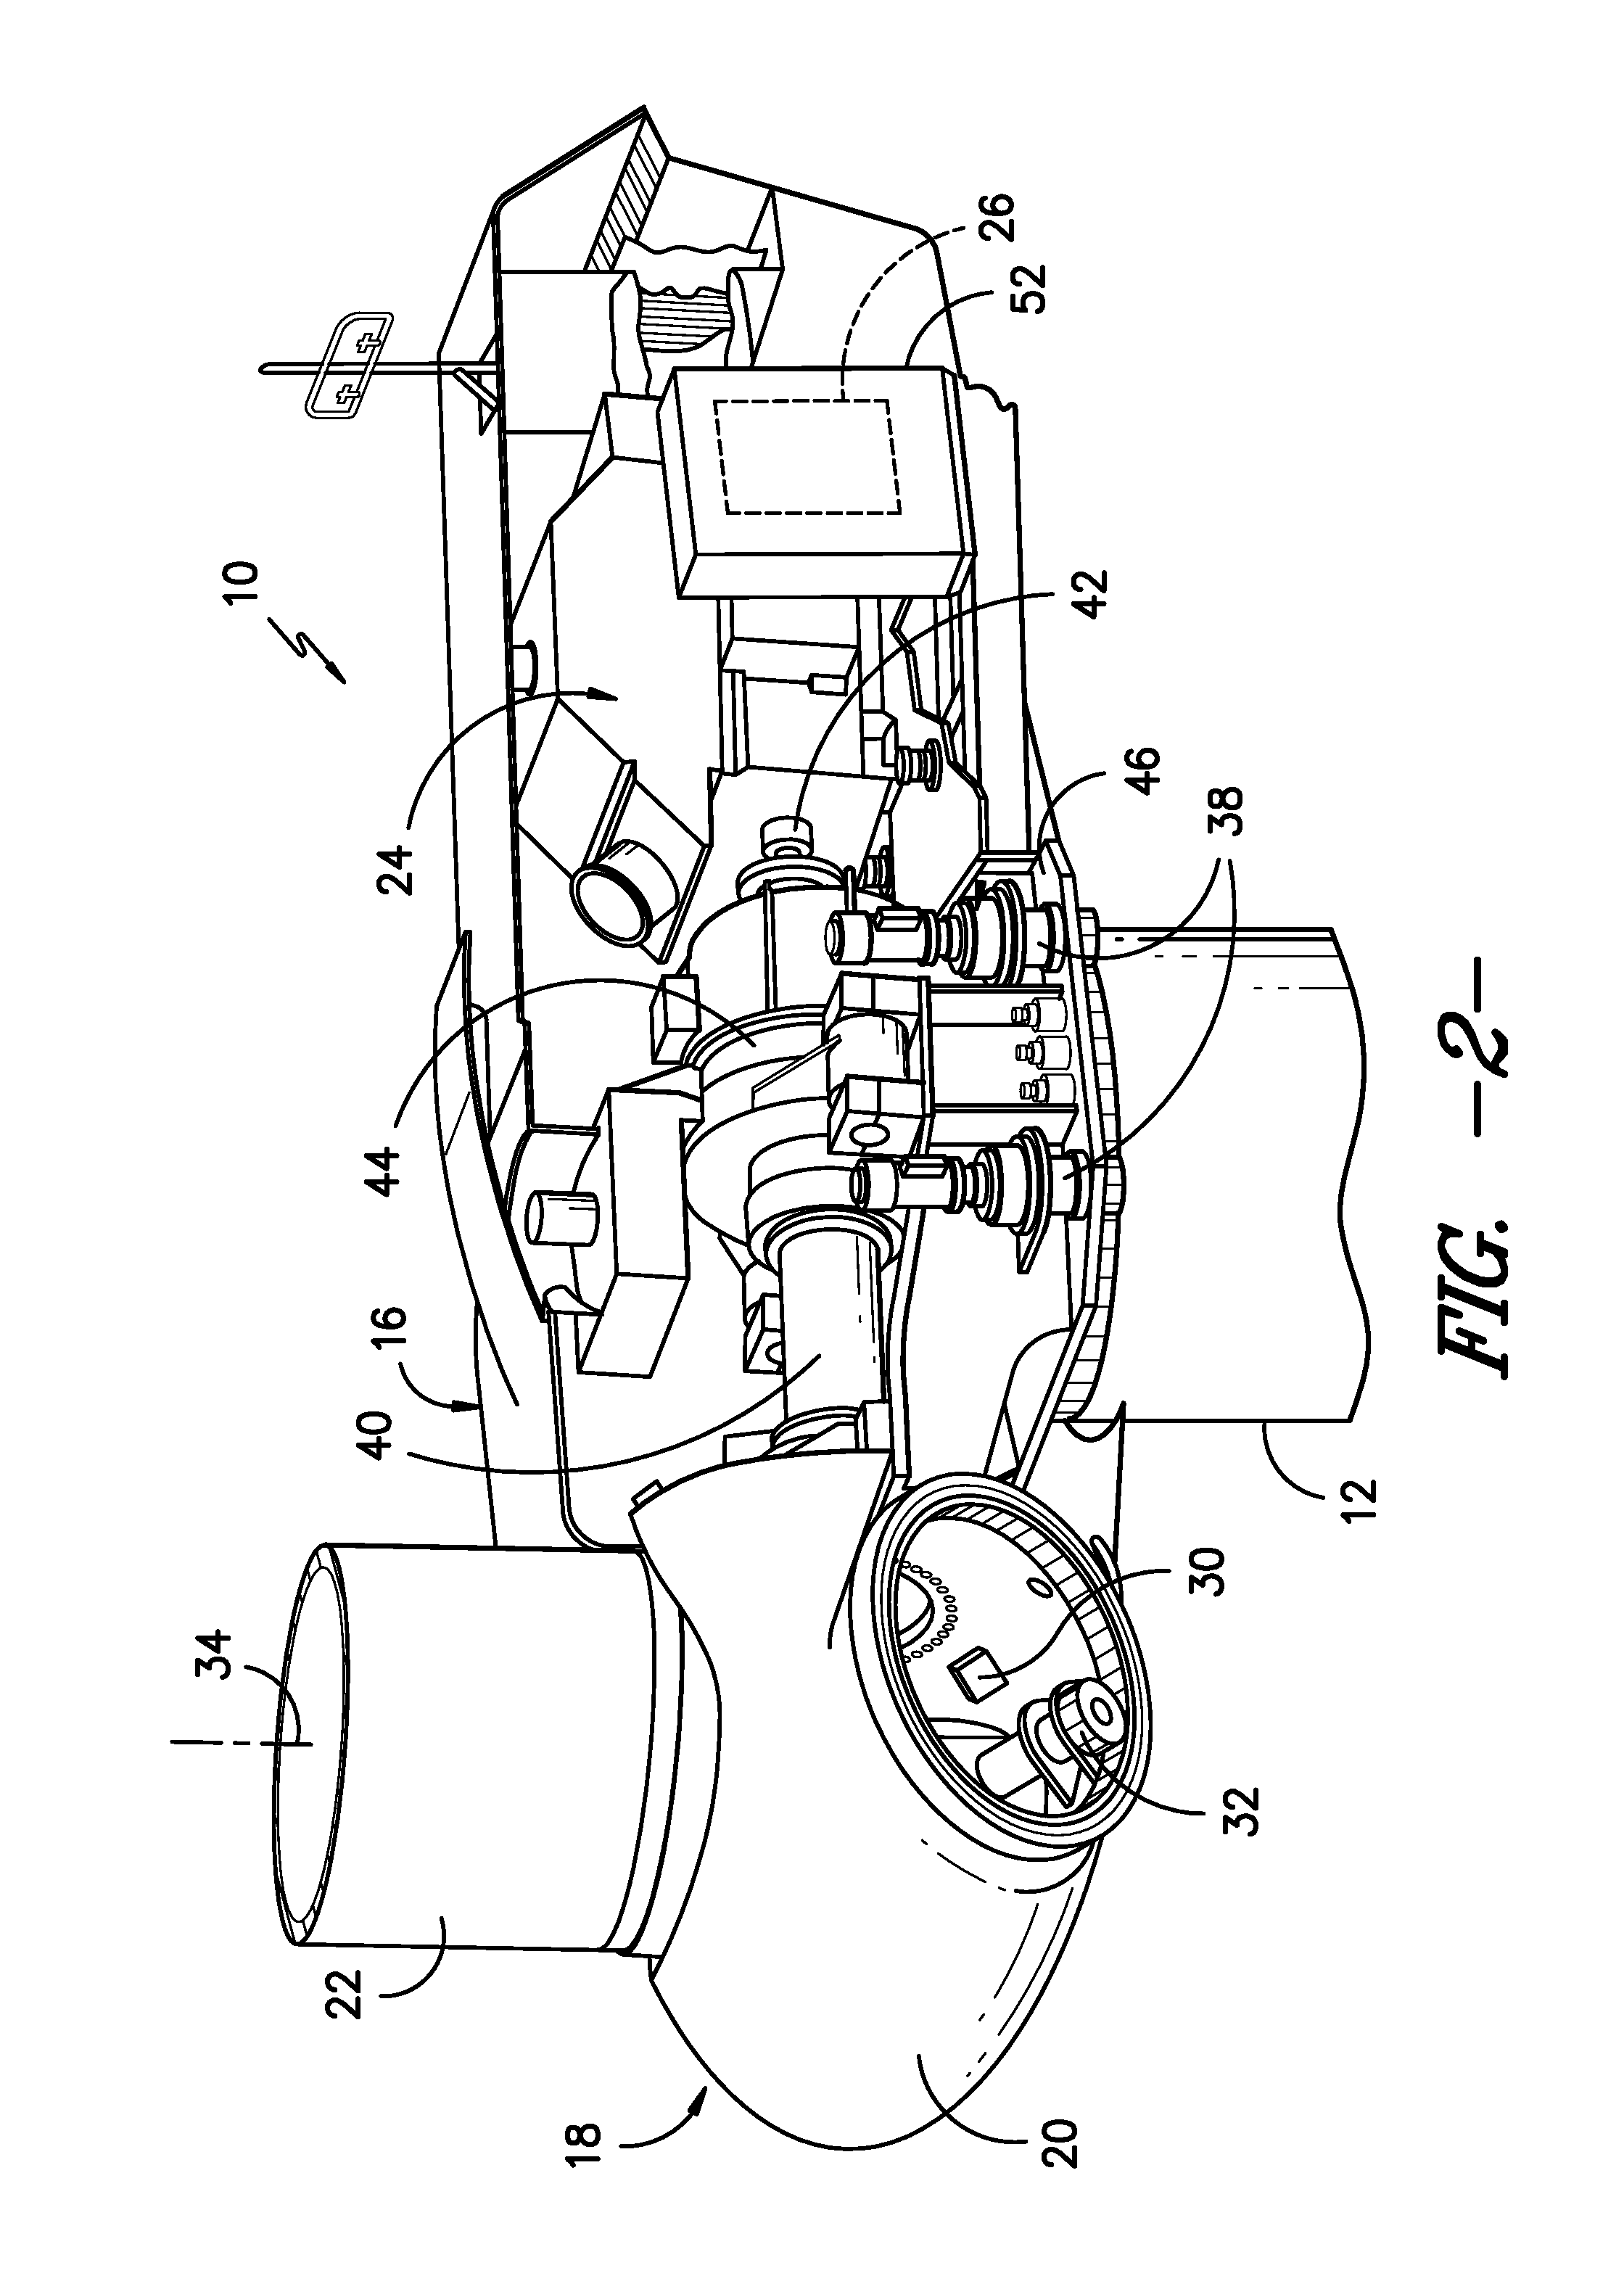 Load control system and method